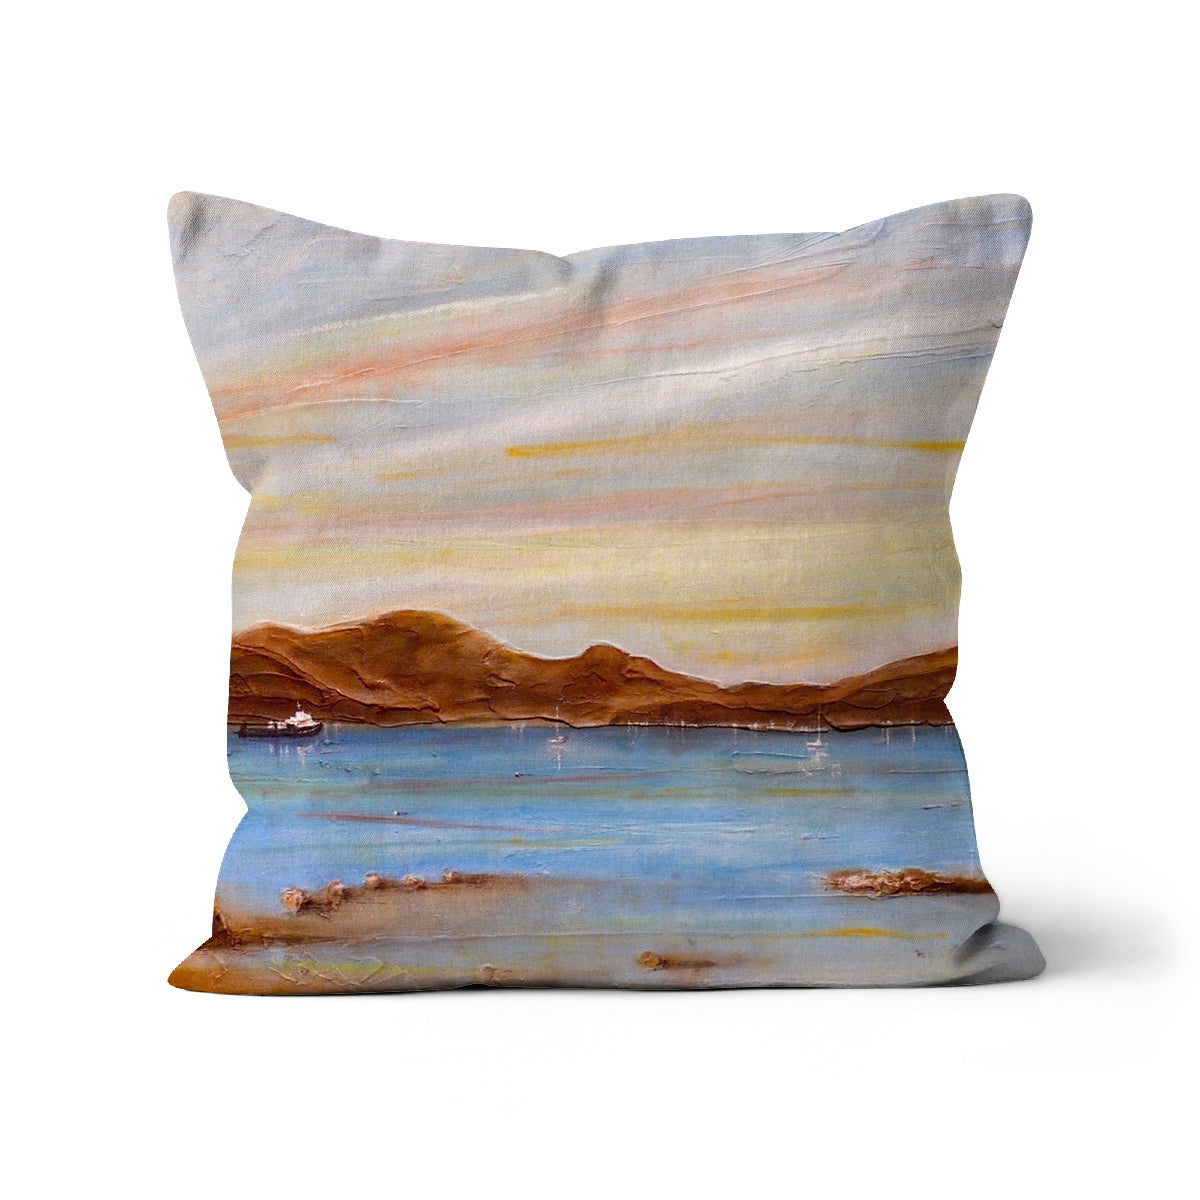 The Last Ferry To Dunoon Art Gifts Cushion-Cushions-River Clyde Art Gallery-Faux Suede-18"x18"-Paintings, Prints, Homeware, Art Gifts From Scotland By Scottish Artist Kevin Hunter